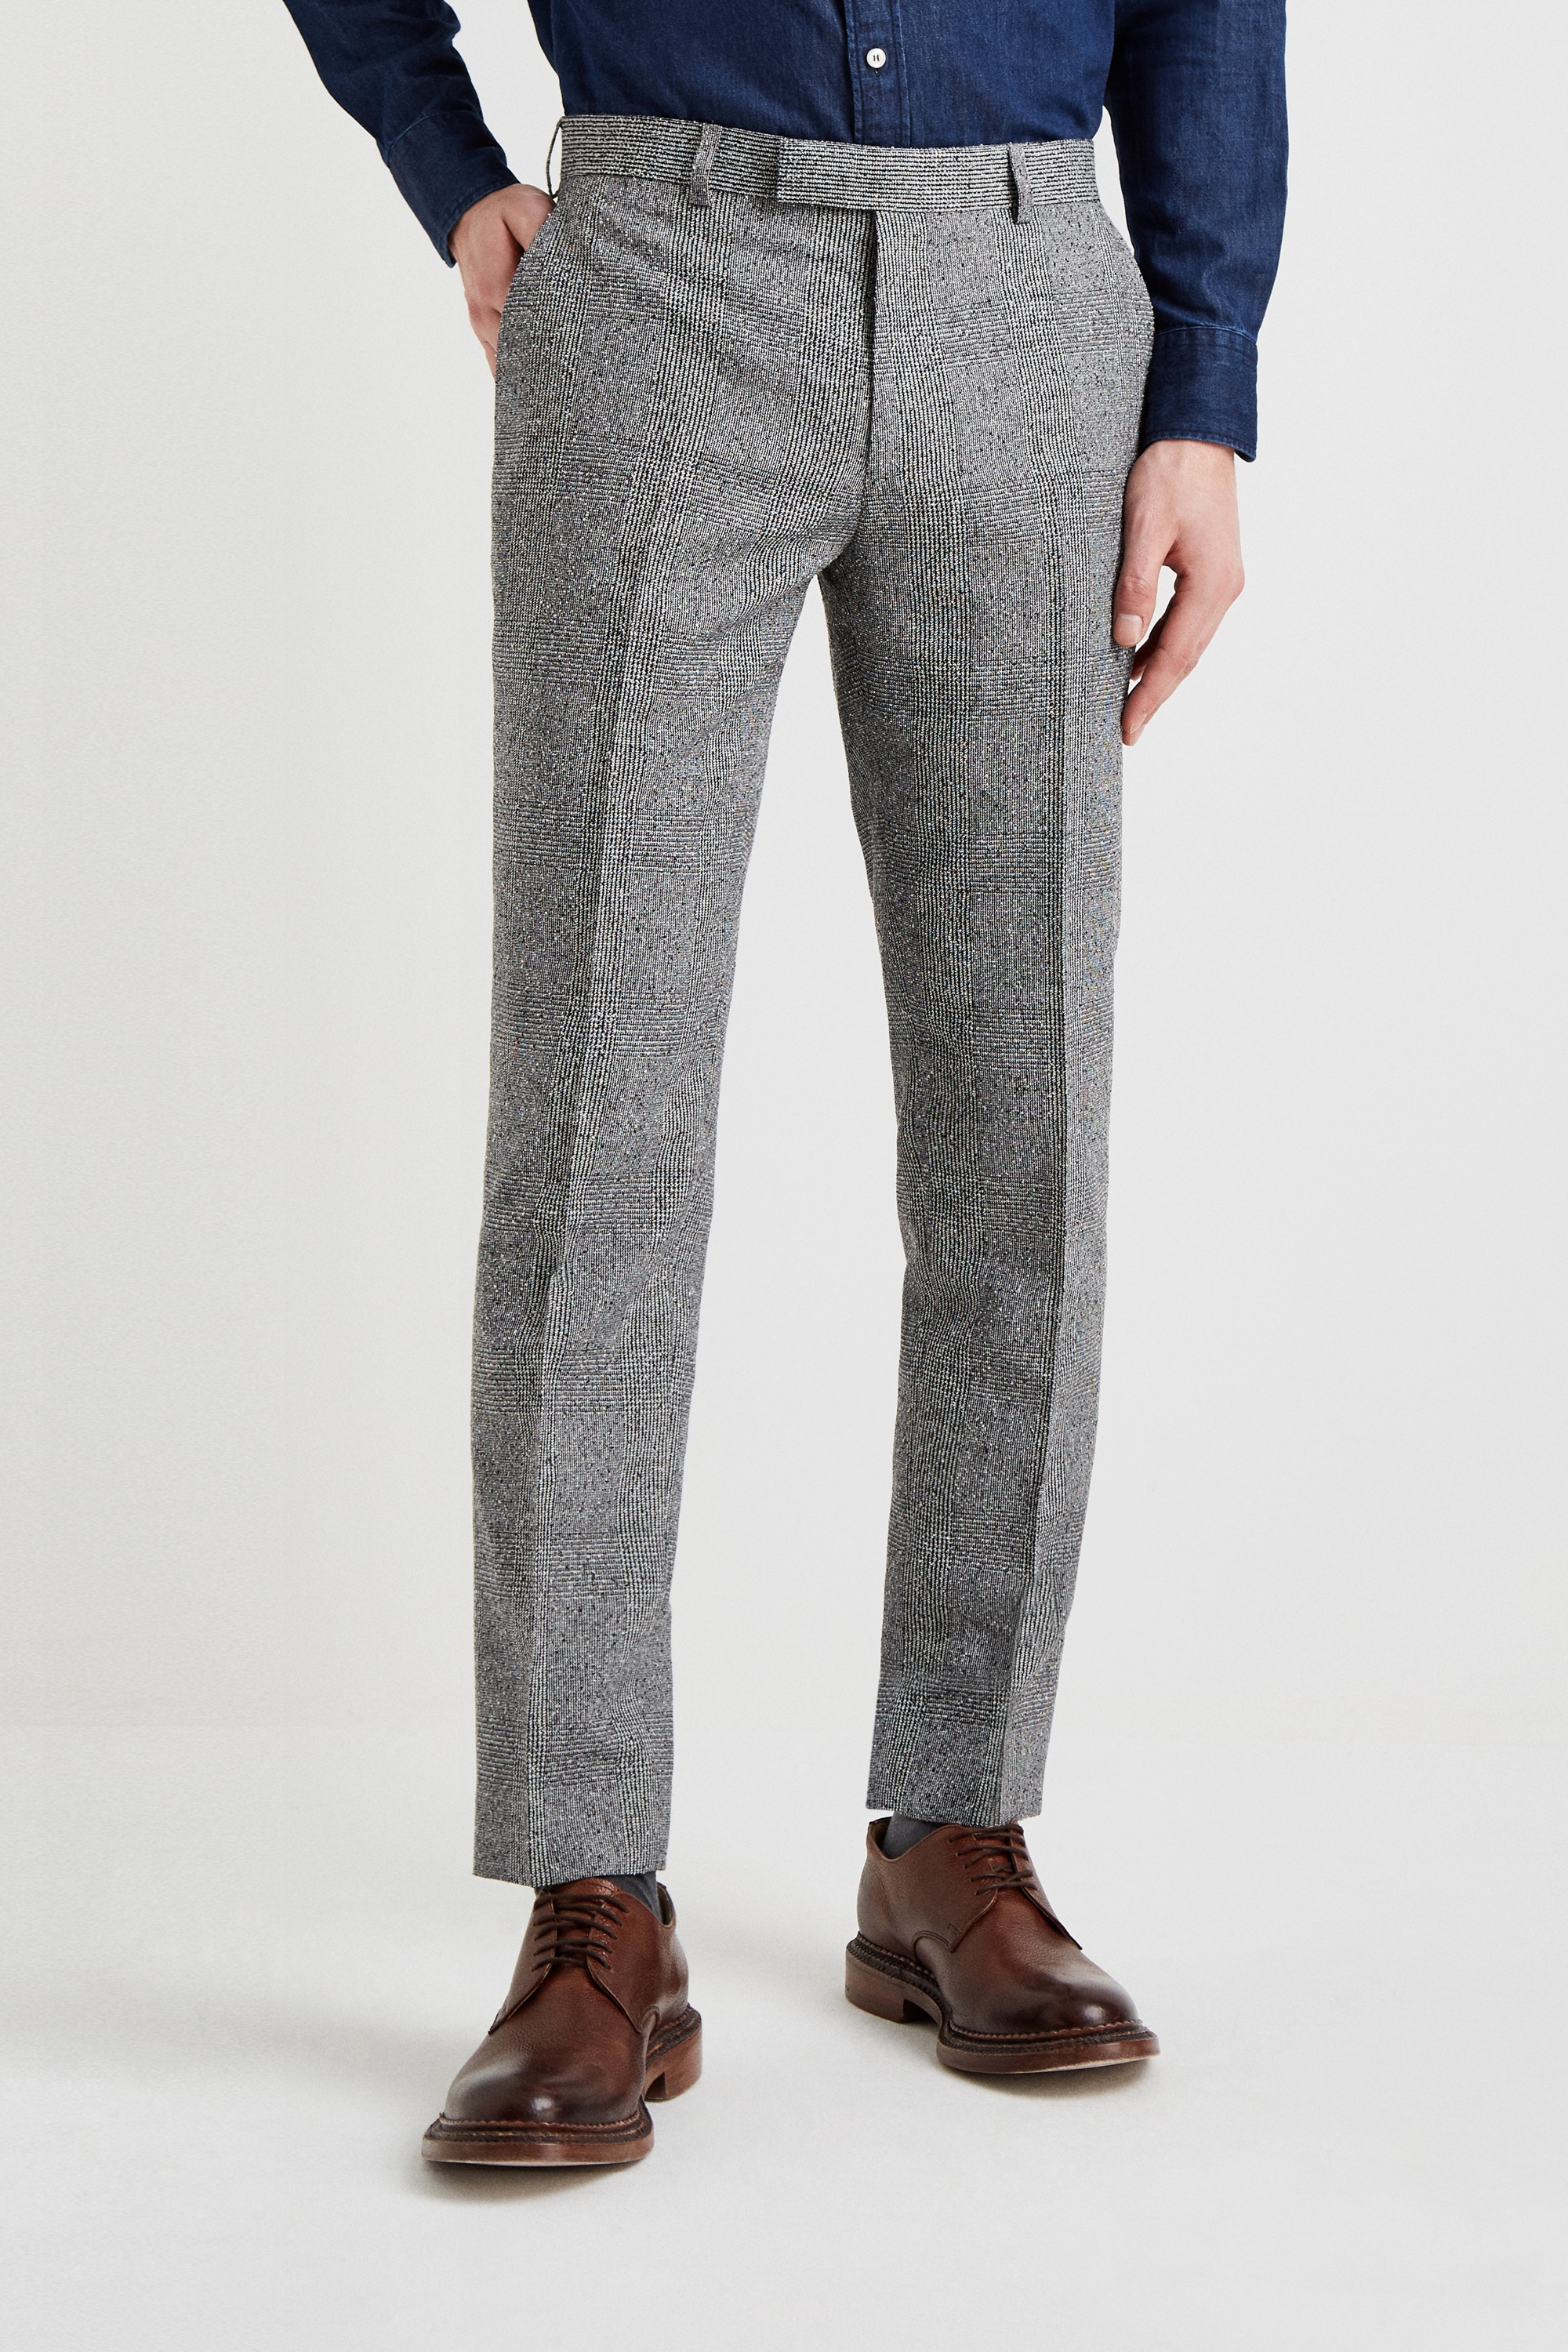 Moss 1851 Tailored Fit Black and White Textured Check Pant